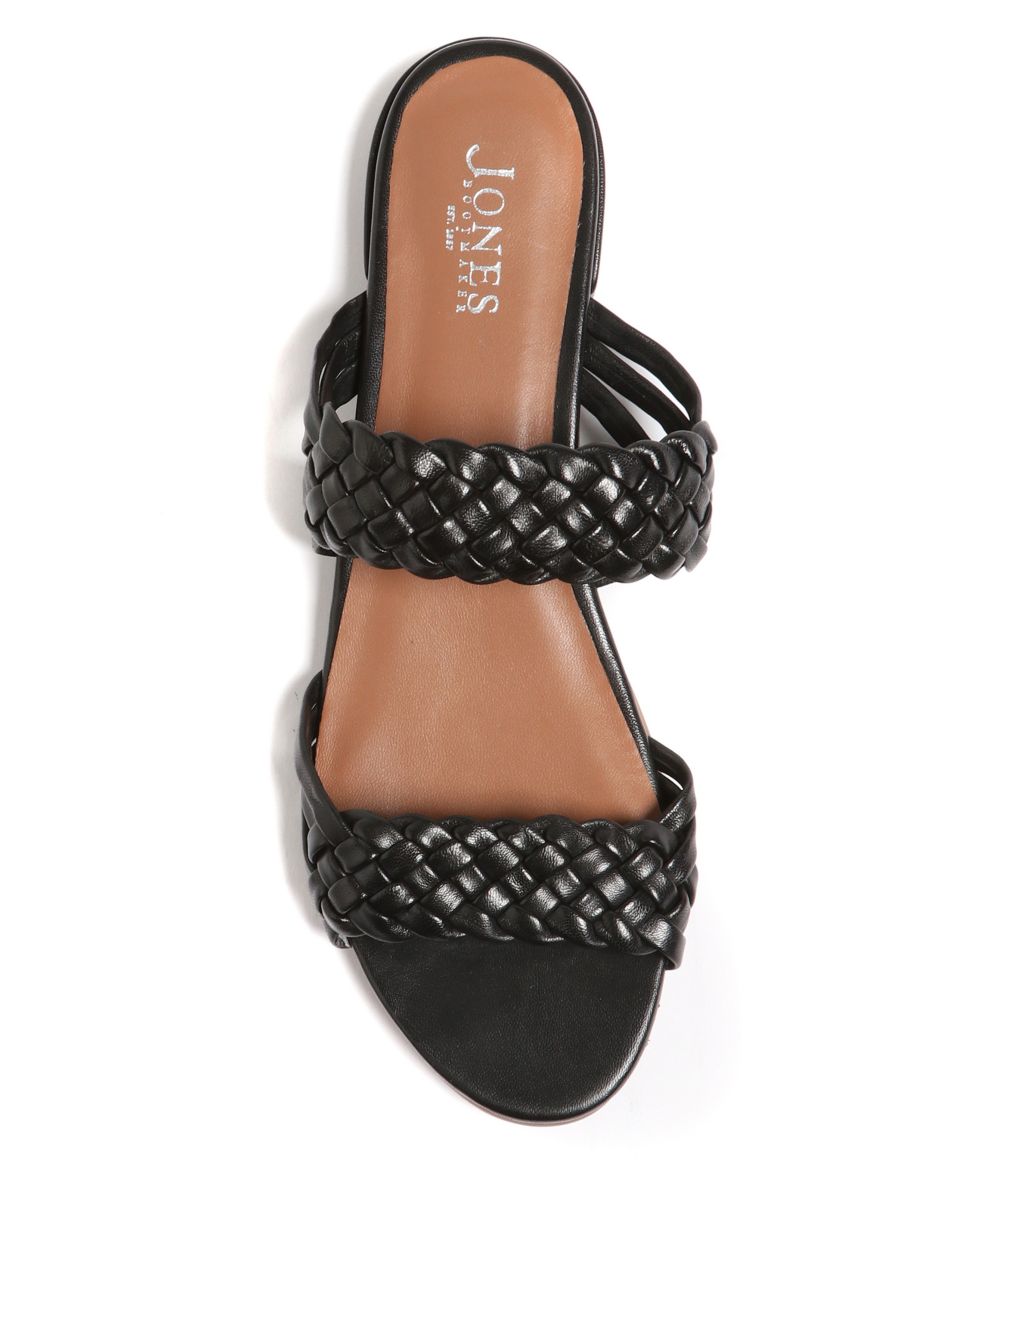 Leather Strappy Mules image 5